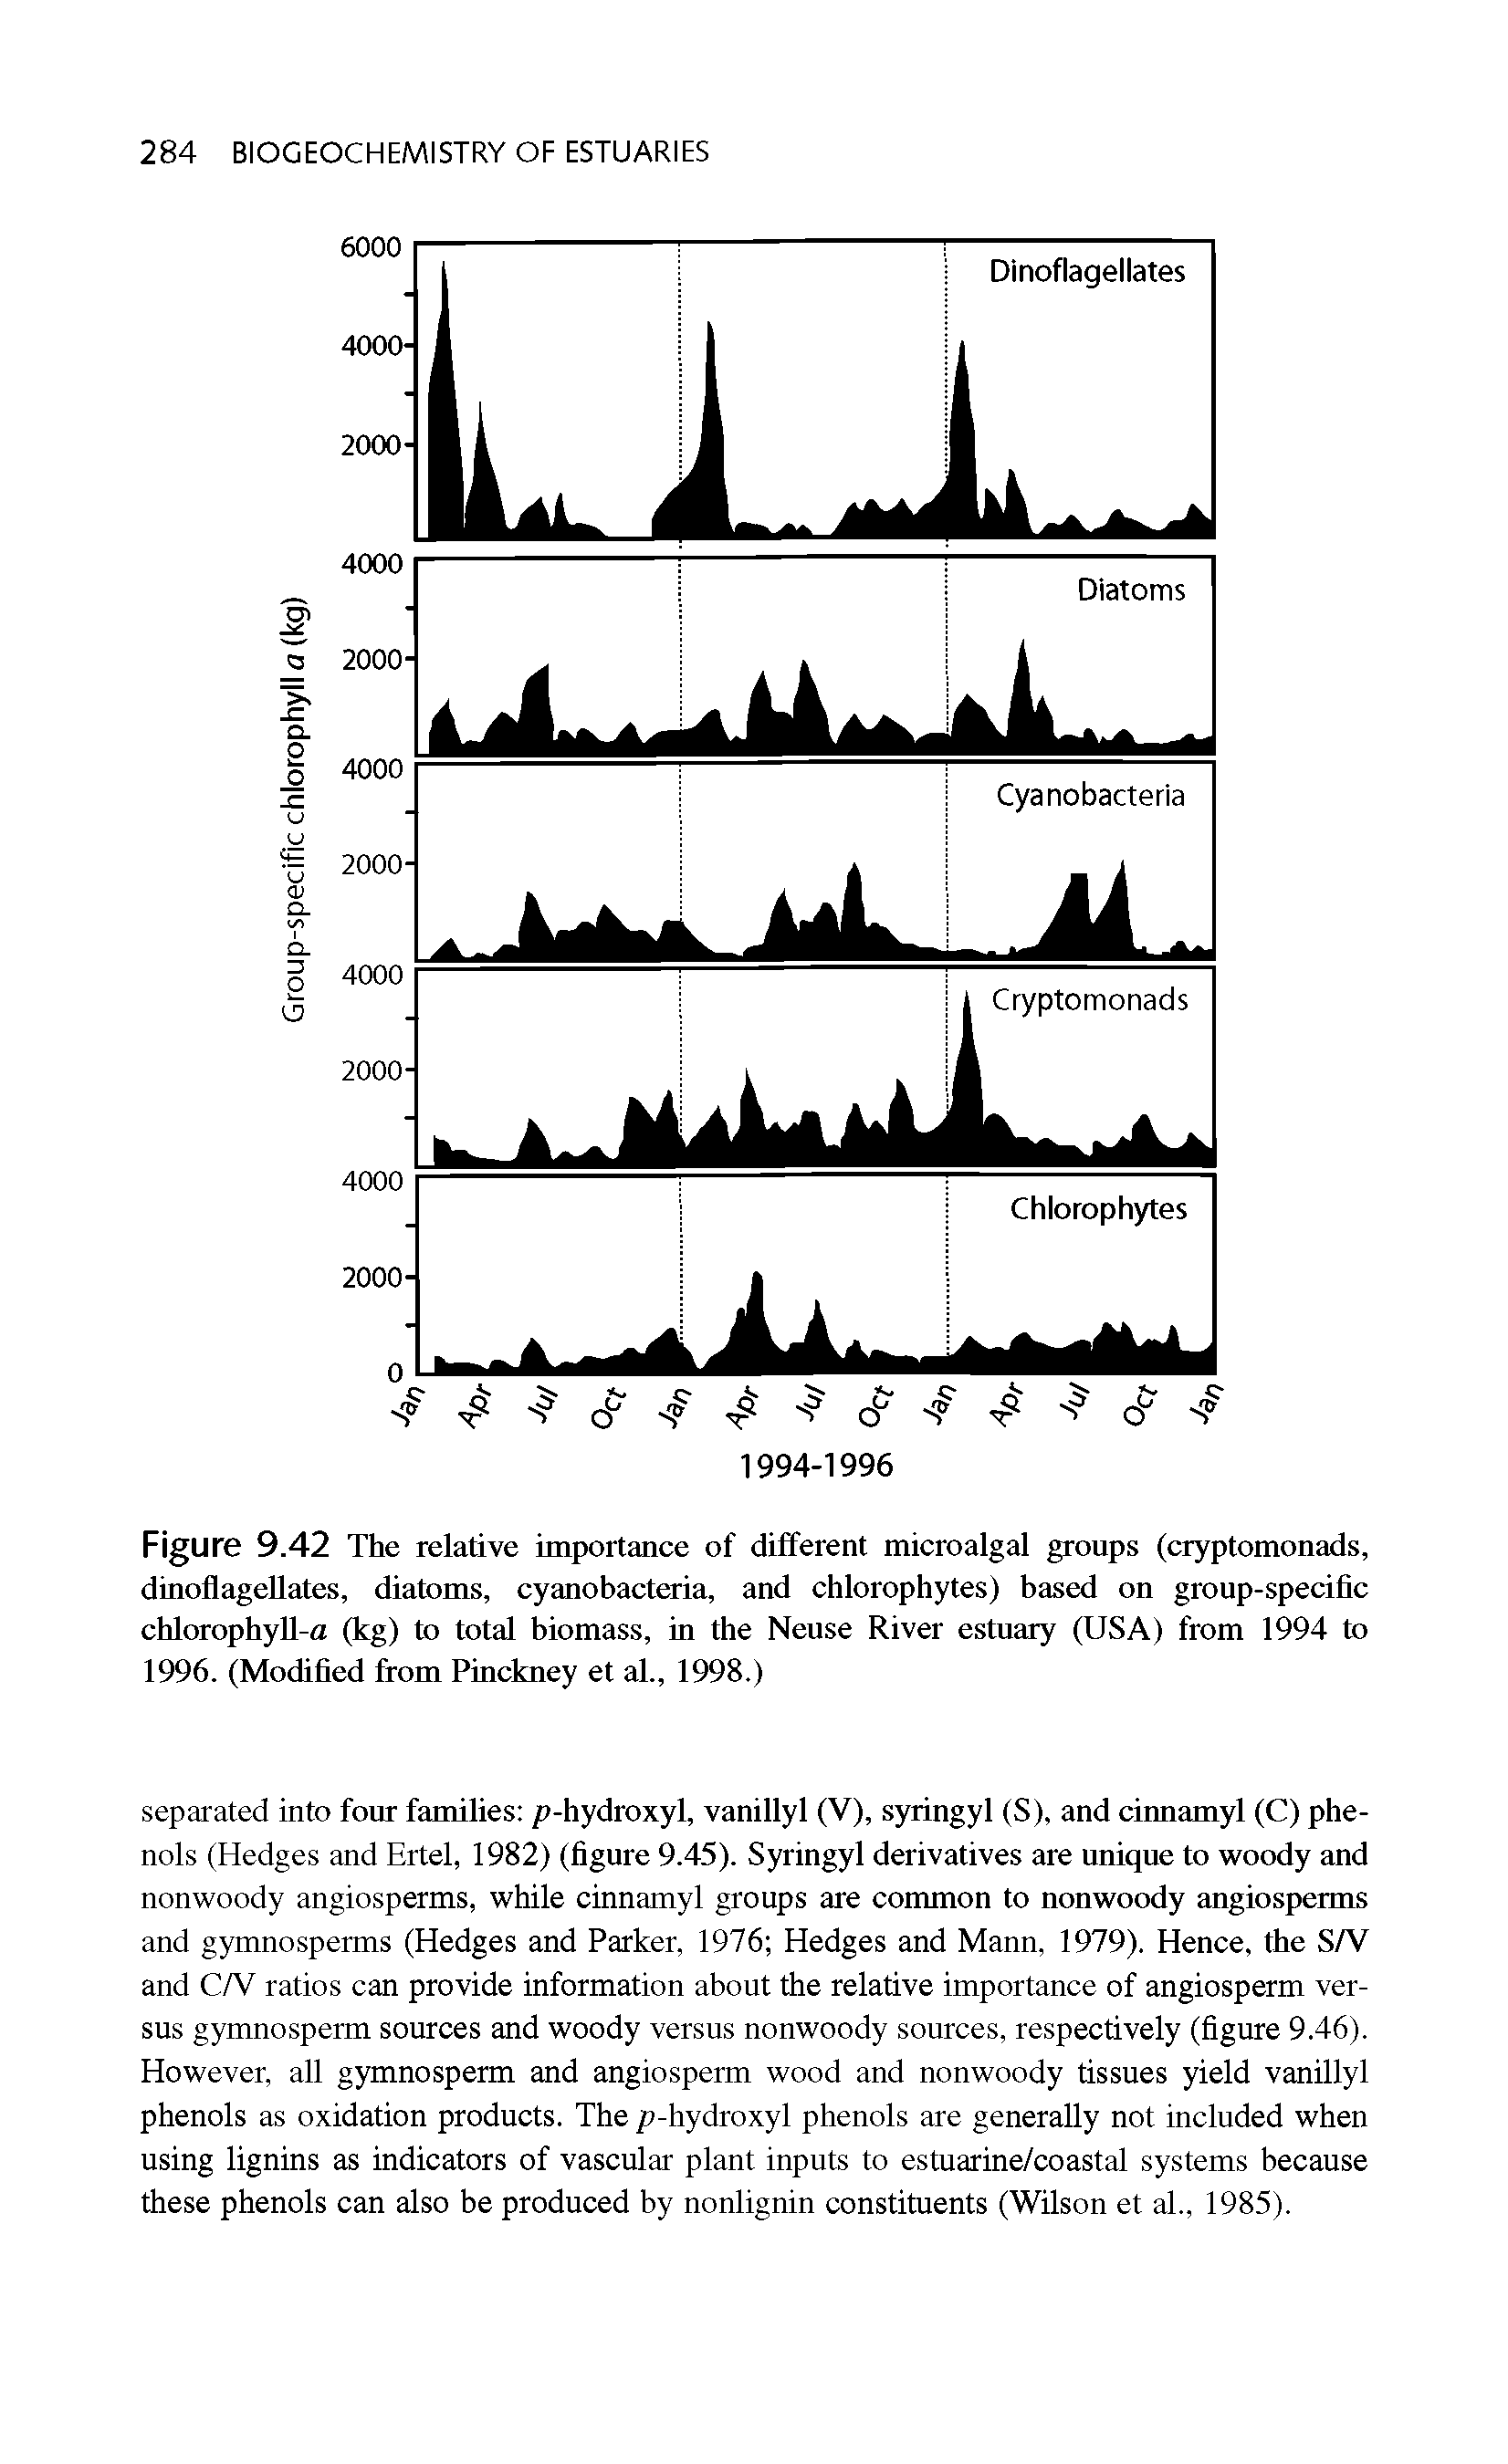 Figure 9.42 The relative importance of different microalgal groups (cryptomonads, dinoflagellates, diatoms, cyanobacteria, and chlorophytes) based on group-specific chlorophyll-a (kg) to total biomass, in the Neuse River estuary (USA) from 1994 to 1996. (Modified from Pinckney et al., 1998.)...